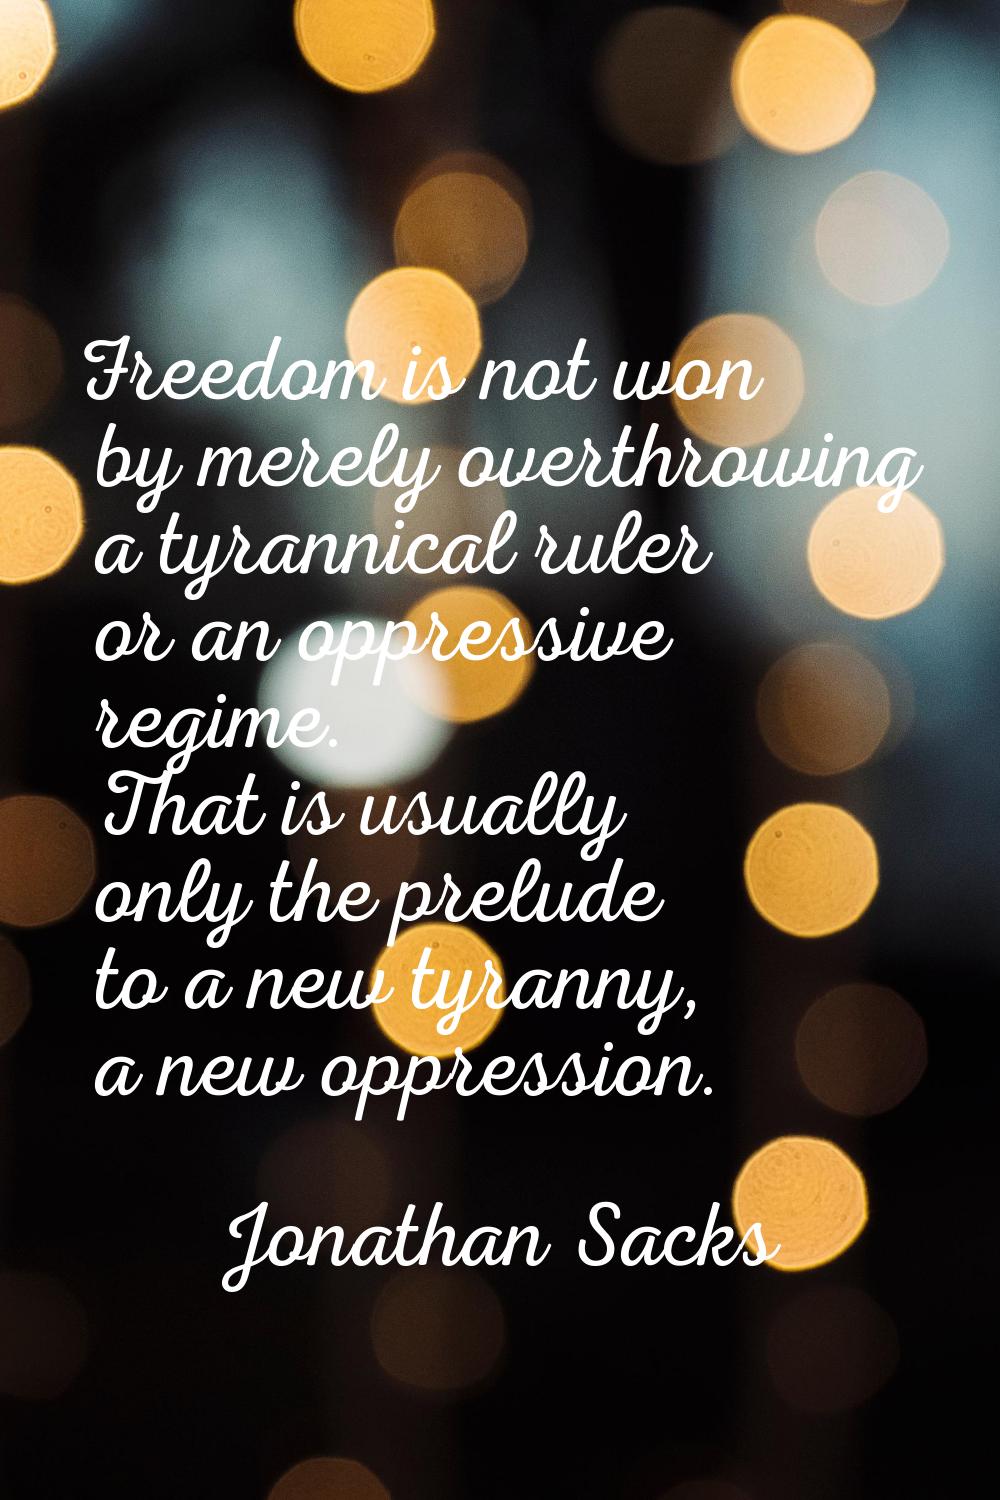 Freedom is not won by merely overthrowing a tyrannical ruler or an oppressive regime. That is usual